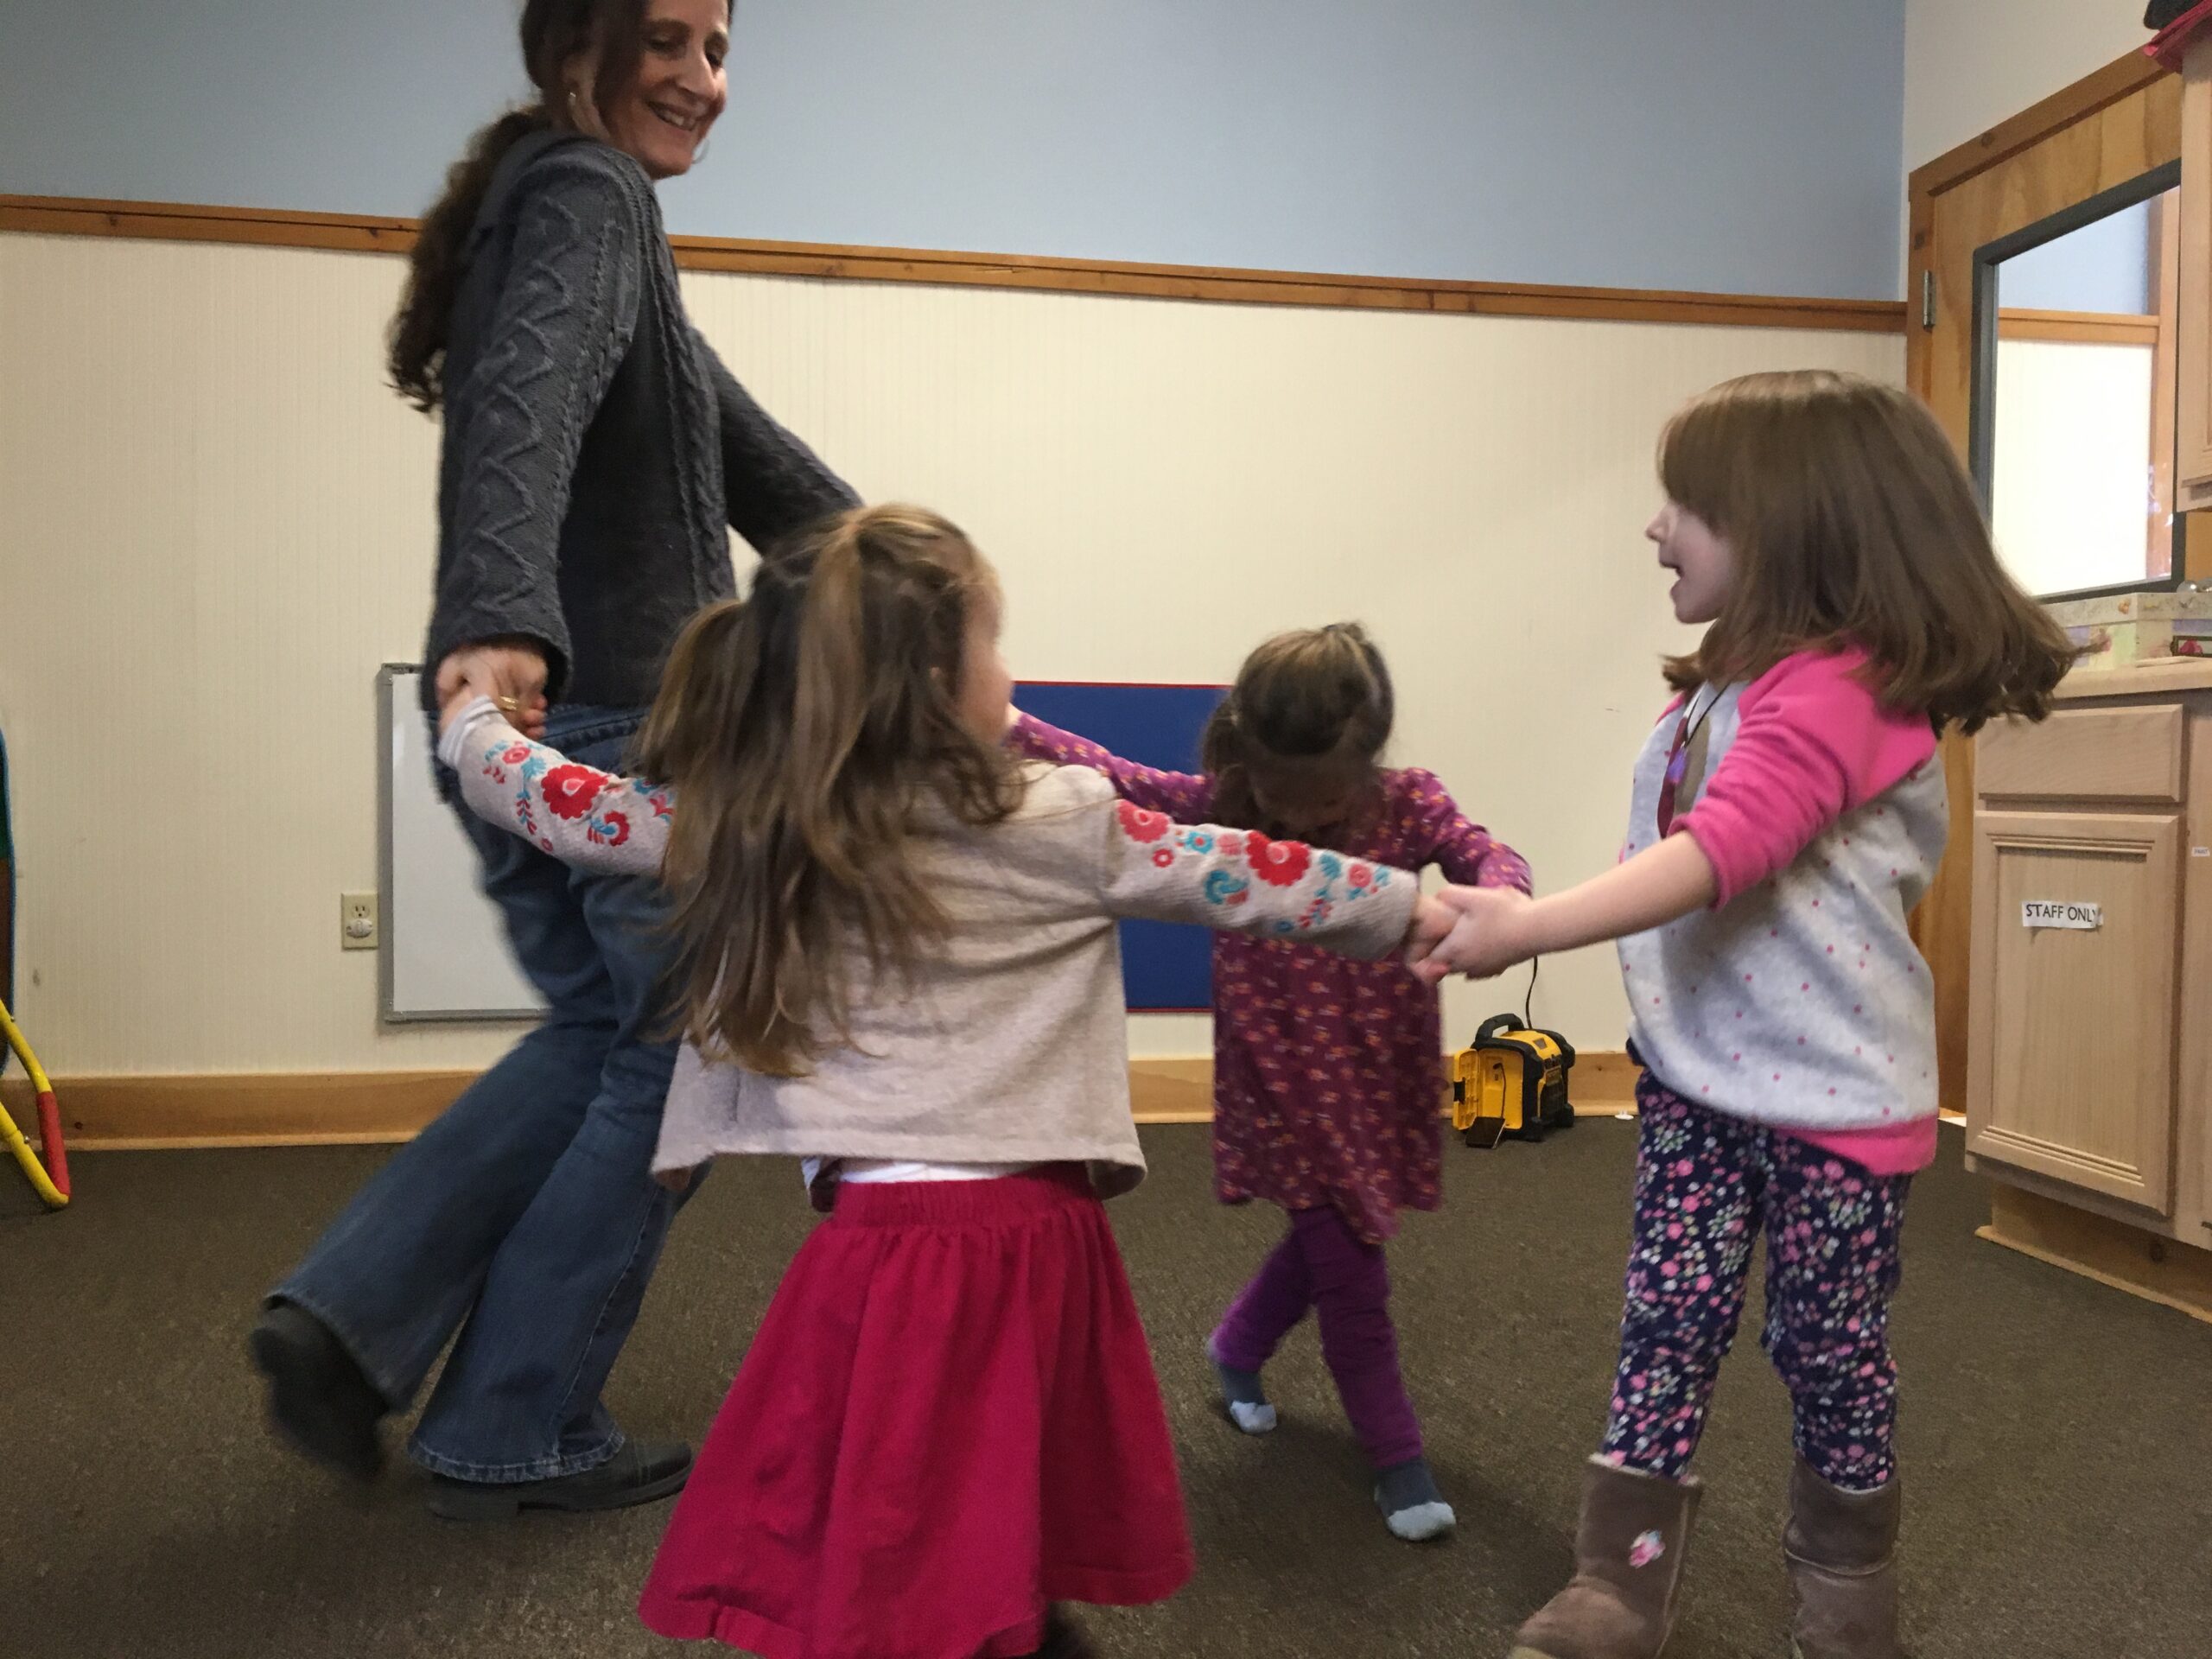 Teacher and children dancing at playgroup